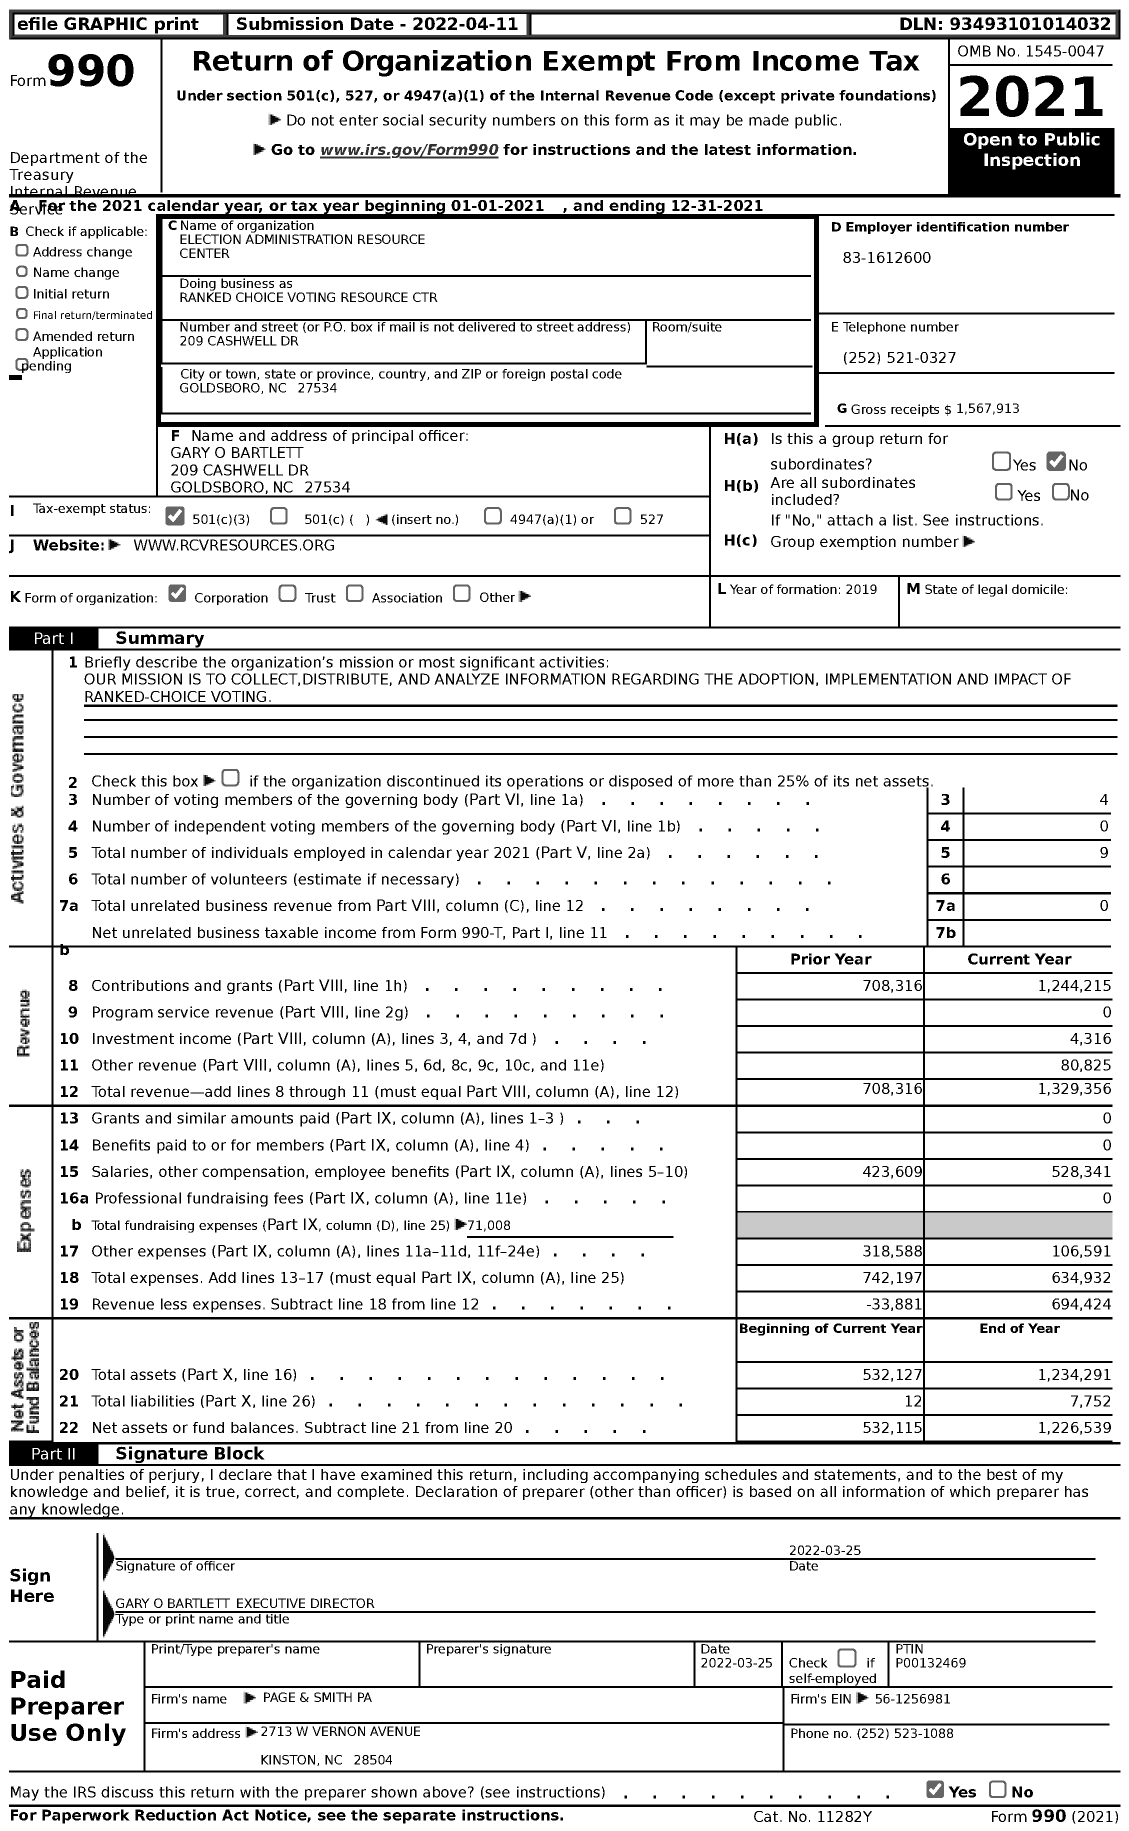 Image of first page of 2021 Form 990 for Ranked Choice Voting Resource Center